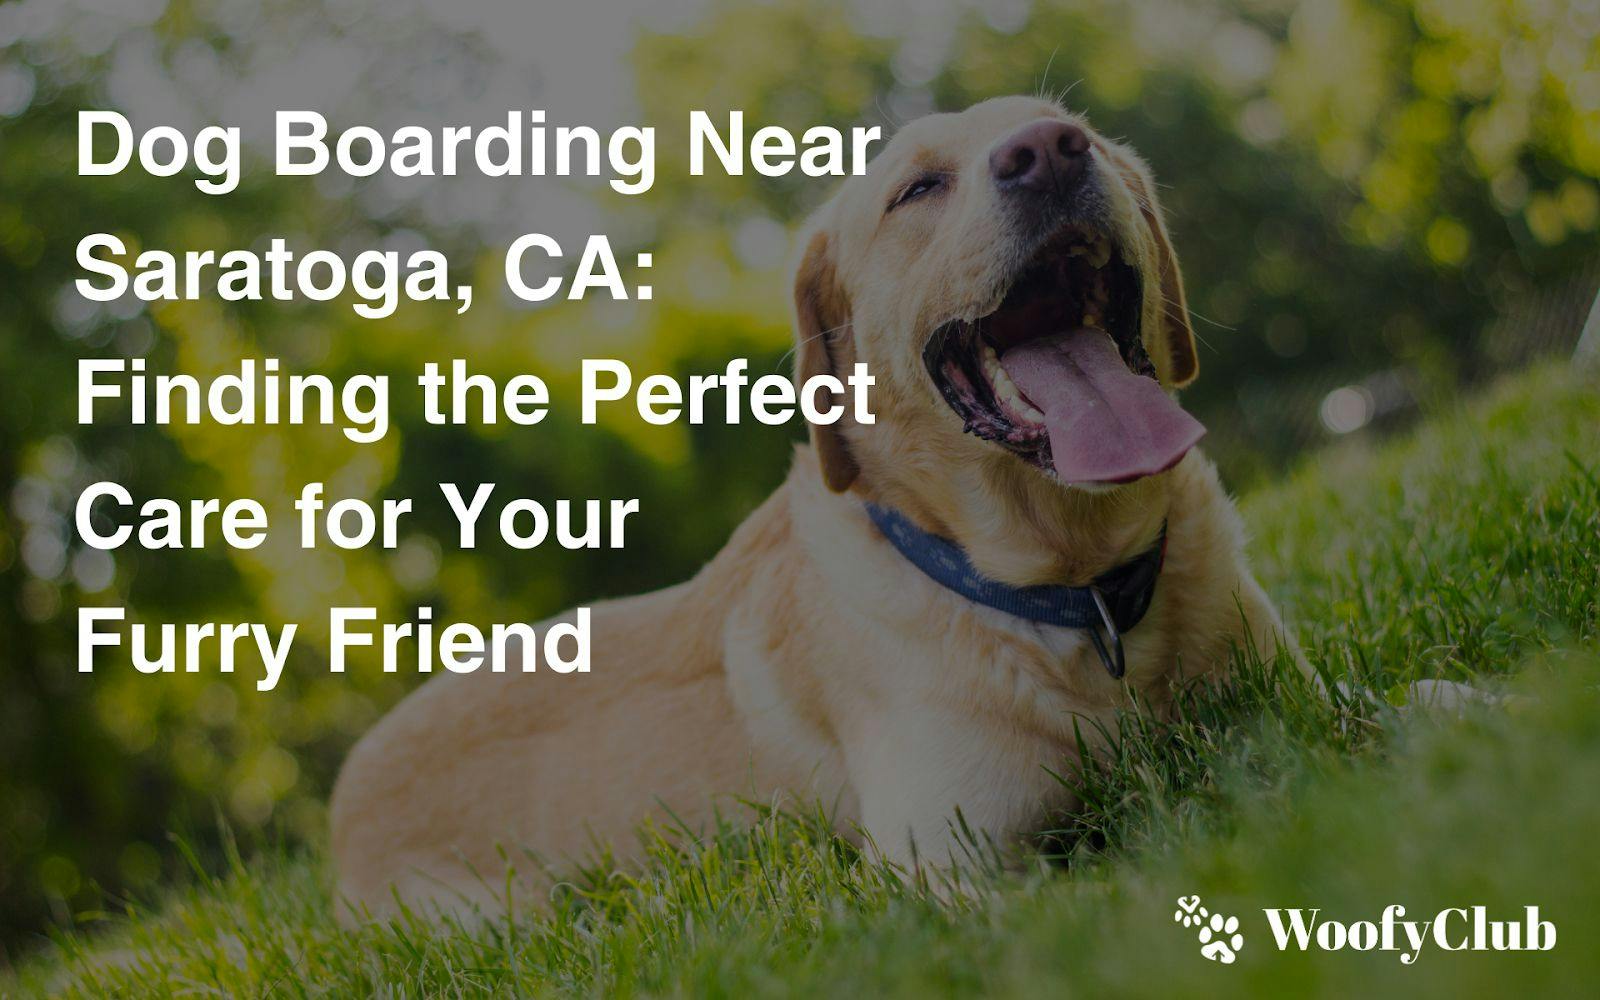 Dog Boarding Near Saratoga, CA: Finding The Perfect Care For Your Furry Friend